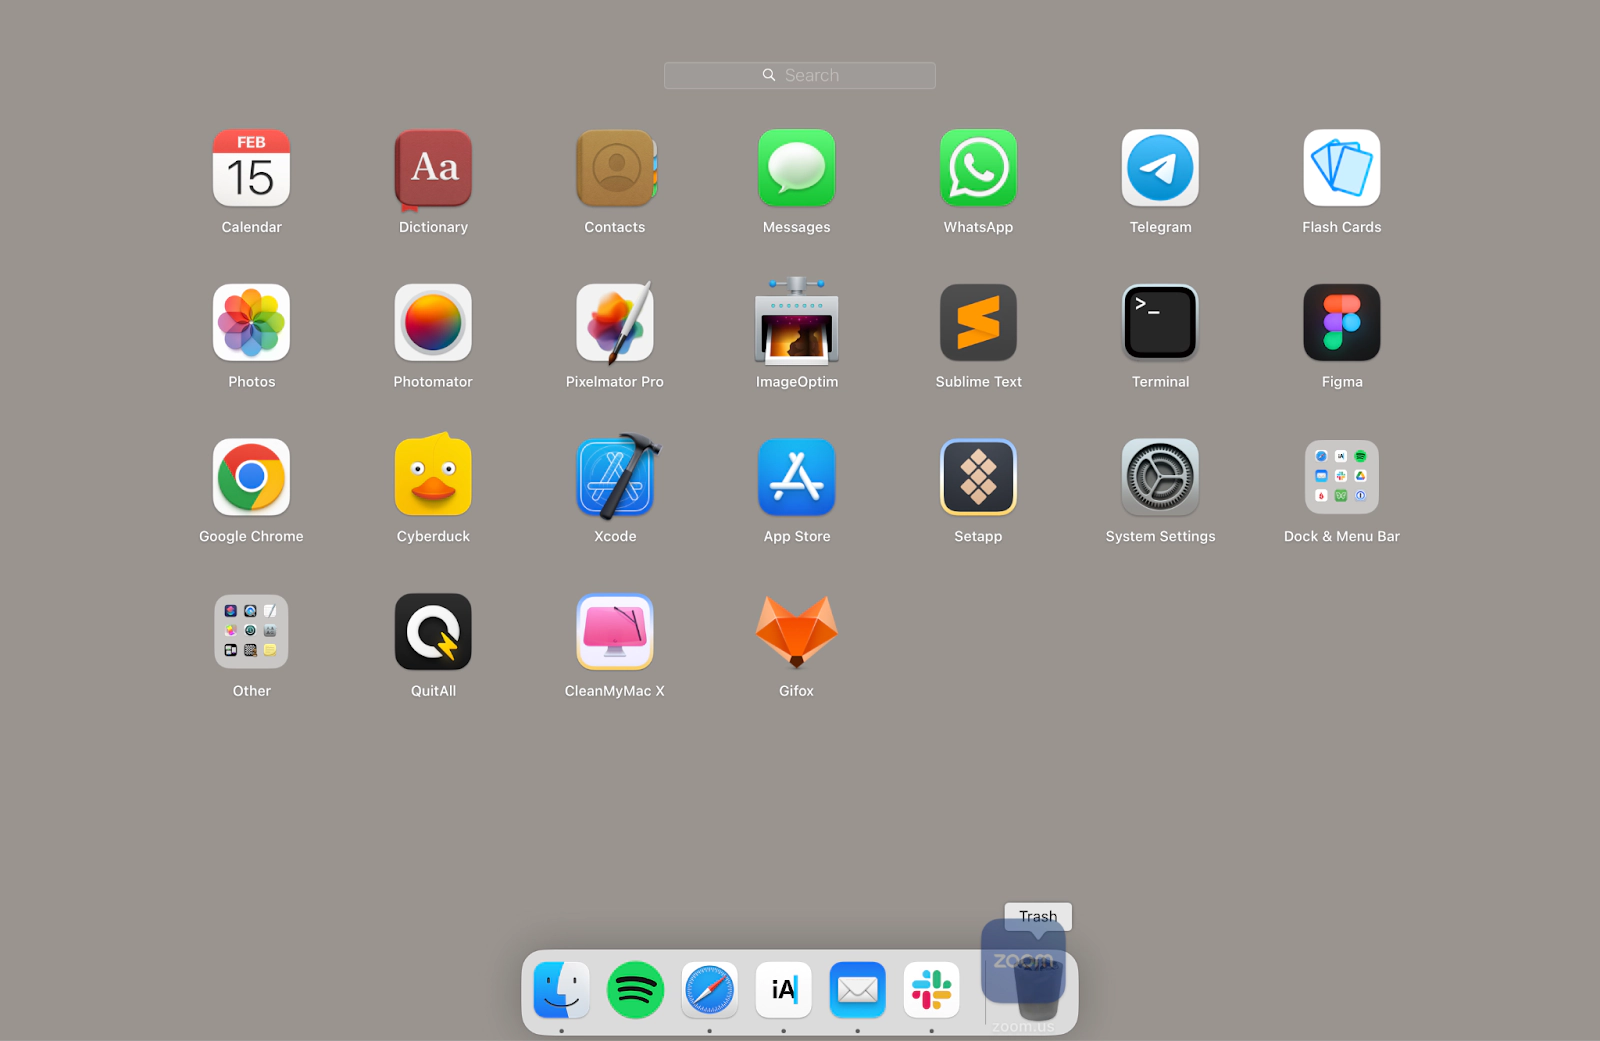 drag and drop any app icon to the Trash in the Dock